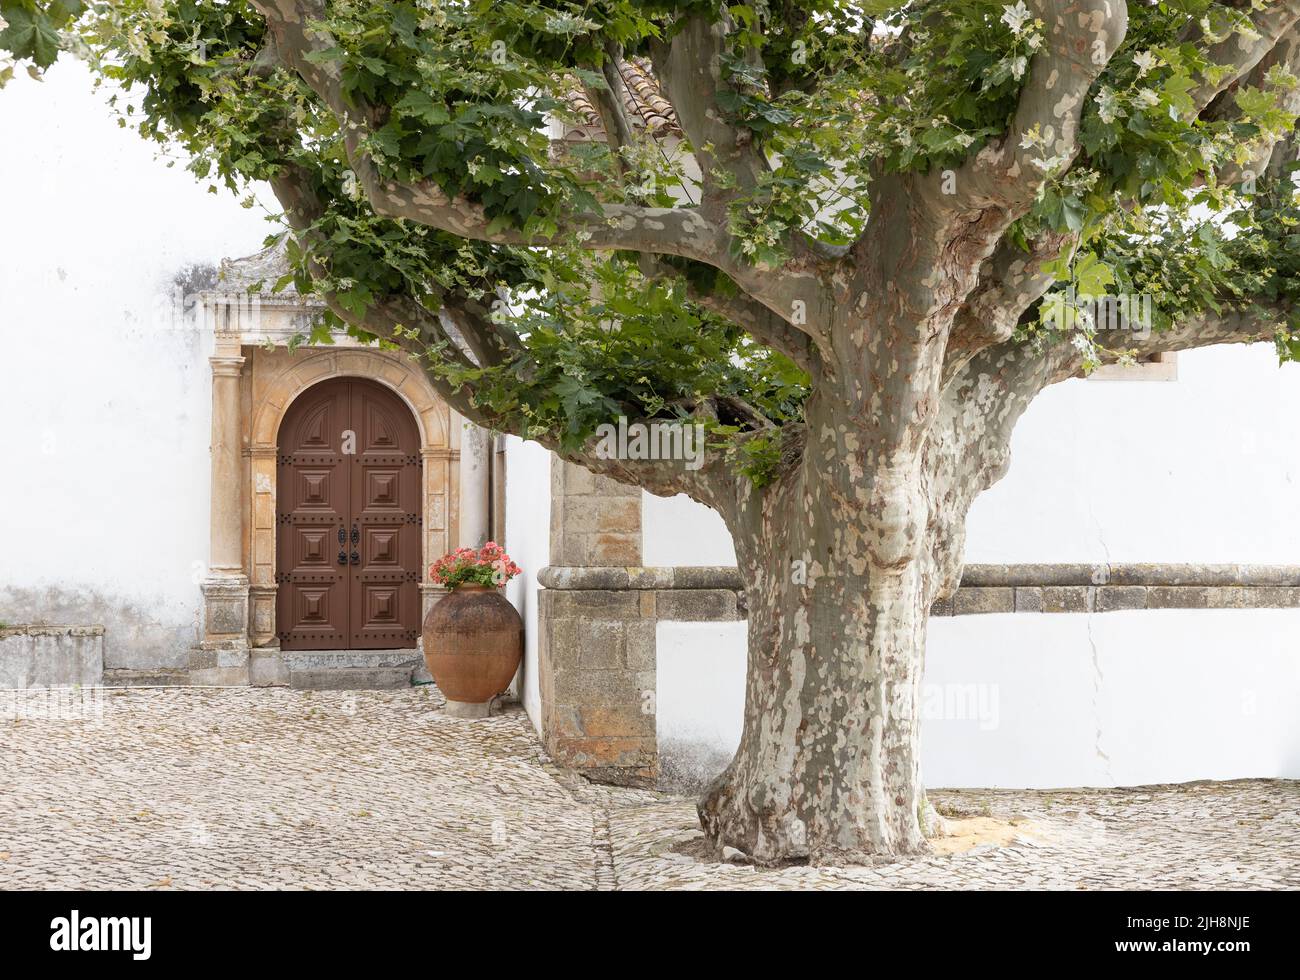 The city of Óbidos, Portugal: Detail view of church Santa Maria with huge tree Stock Photo